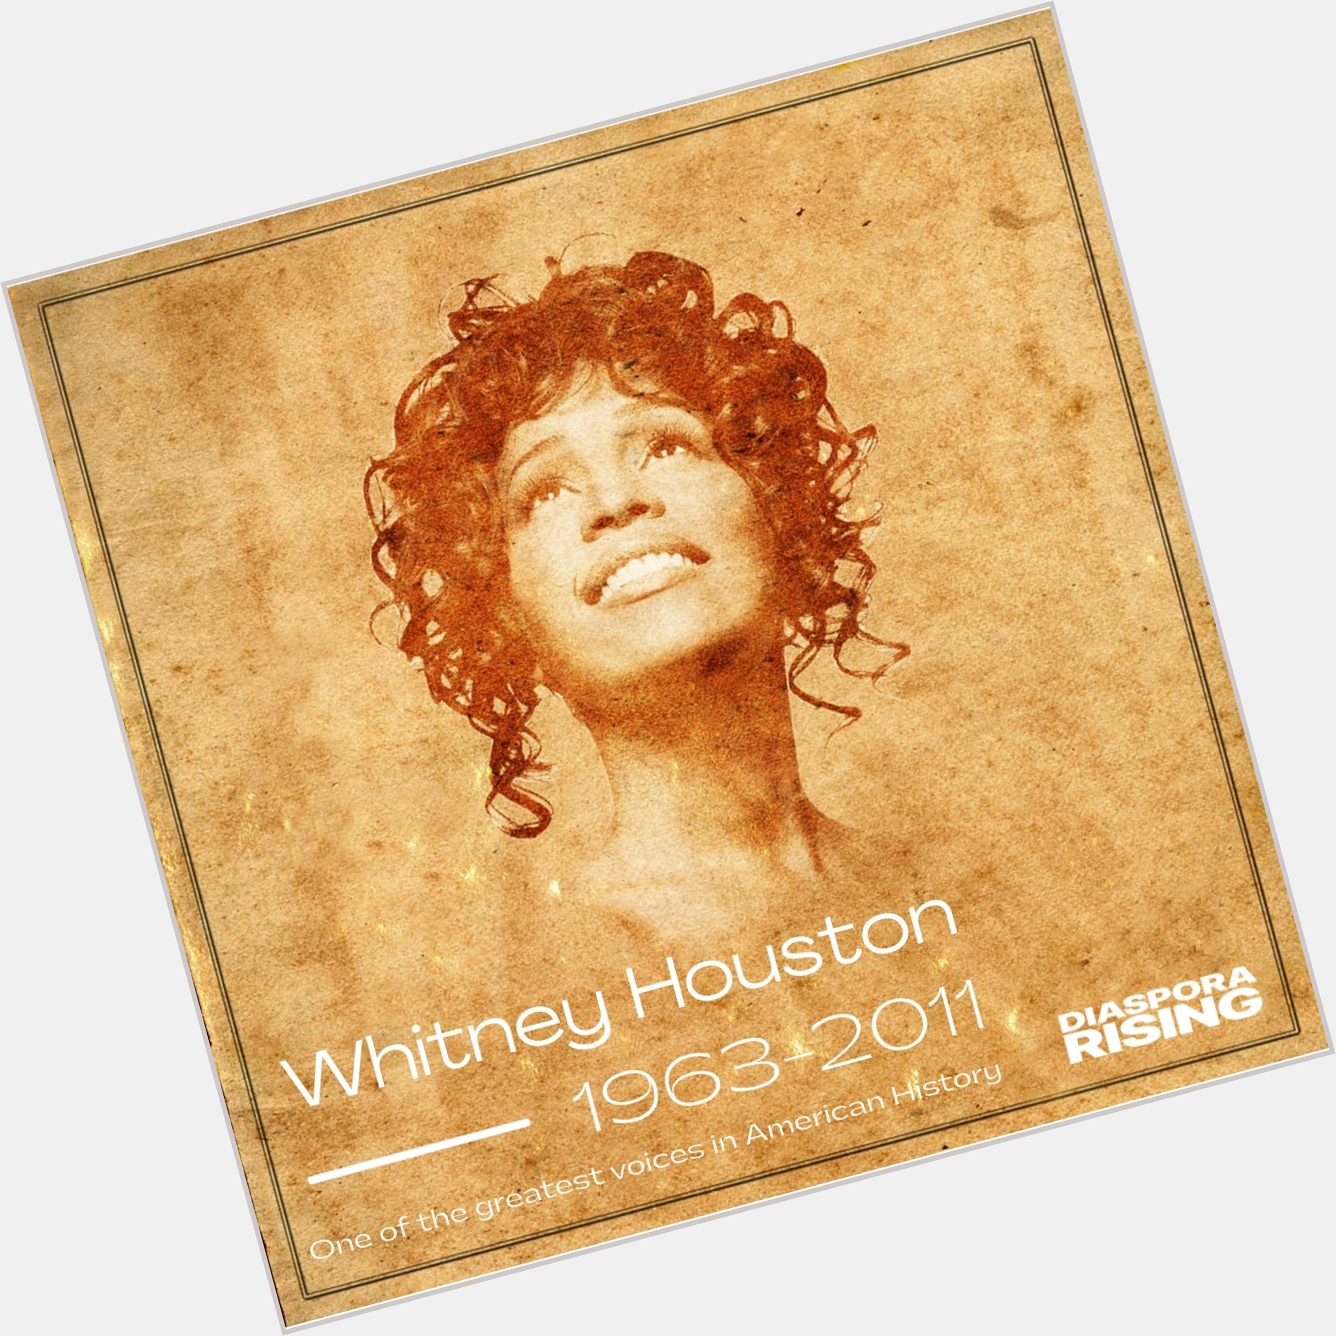 Today we celebrate one of the greatest voices of all time! Happy Birthday, Whitney Houston. 